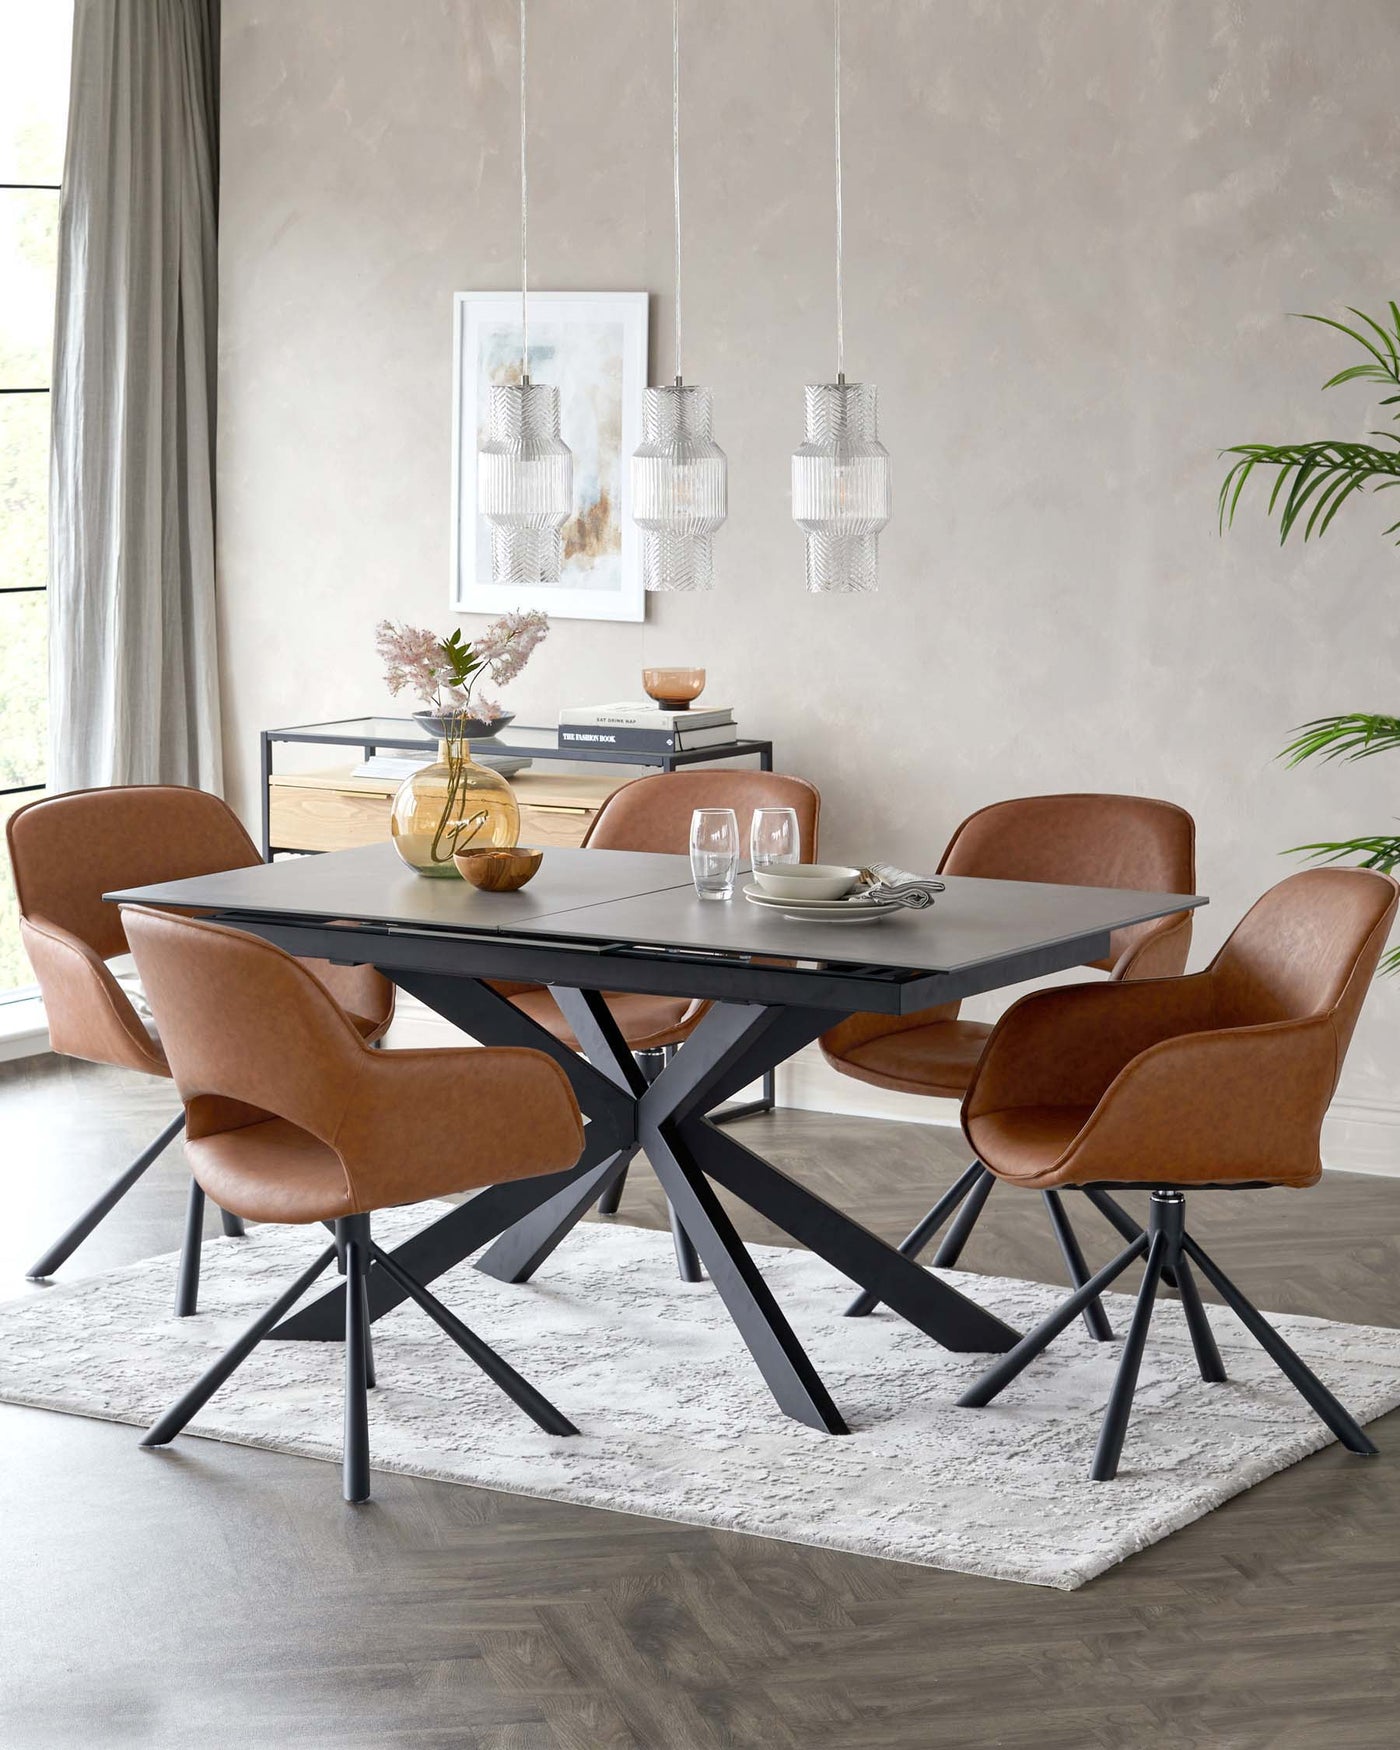 Modern dining room set featuring a rectangular black table with a unique X-shaped base. Accompanied by six caramel brown upholstered chairs with black metal legs, situated on a textured white area rug. A minimalist sideboard with a combination of black metal and natural wood tones is positioned against the wall.